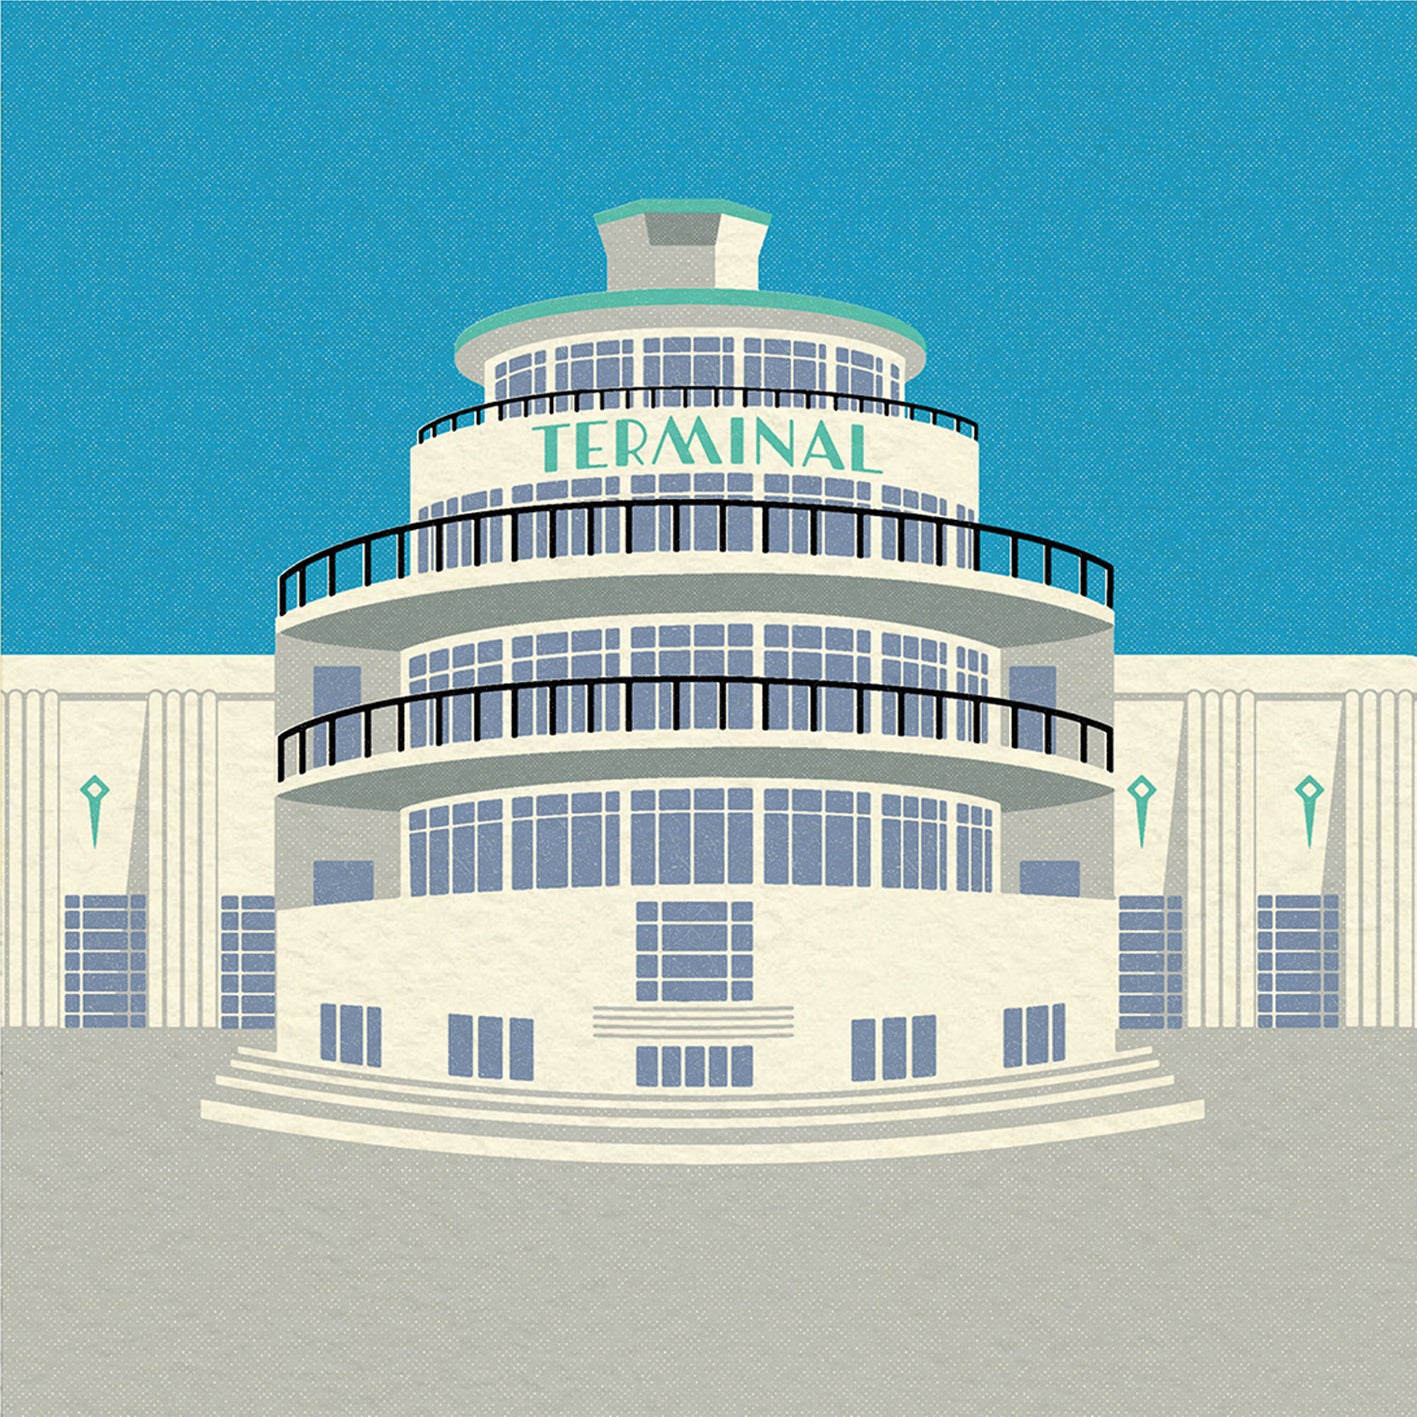 A  greetings card featuring a stylised illustration of an circular art deco airport building in blue, grey and green with the word 'terminal' across the front of the building.